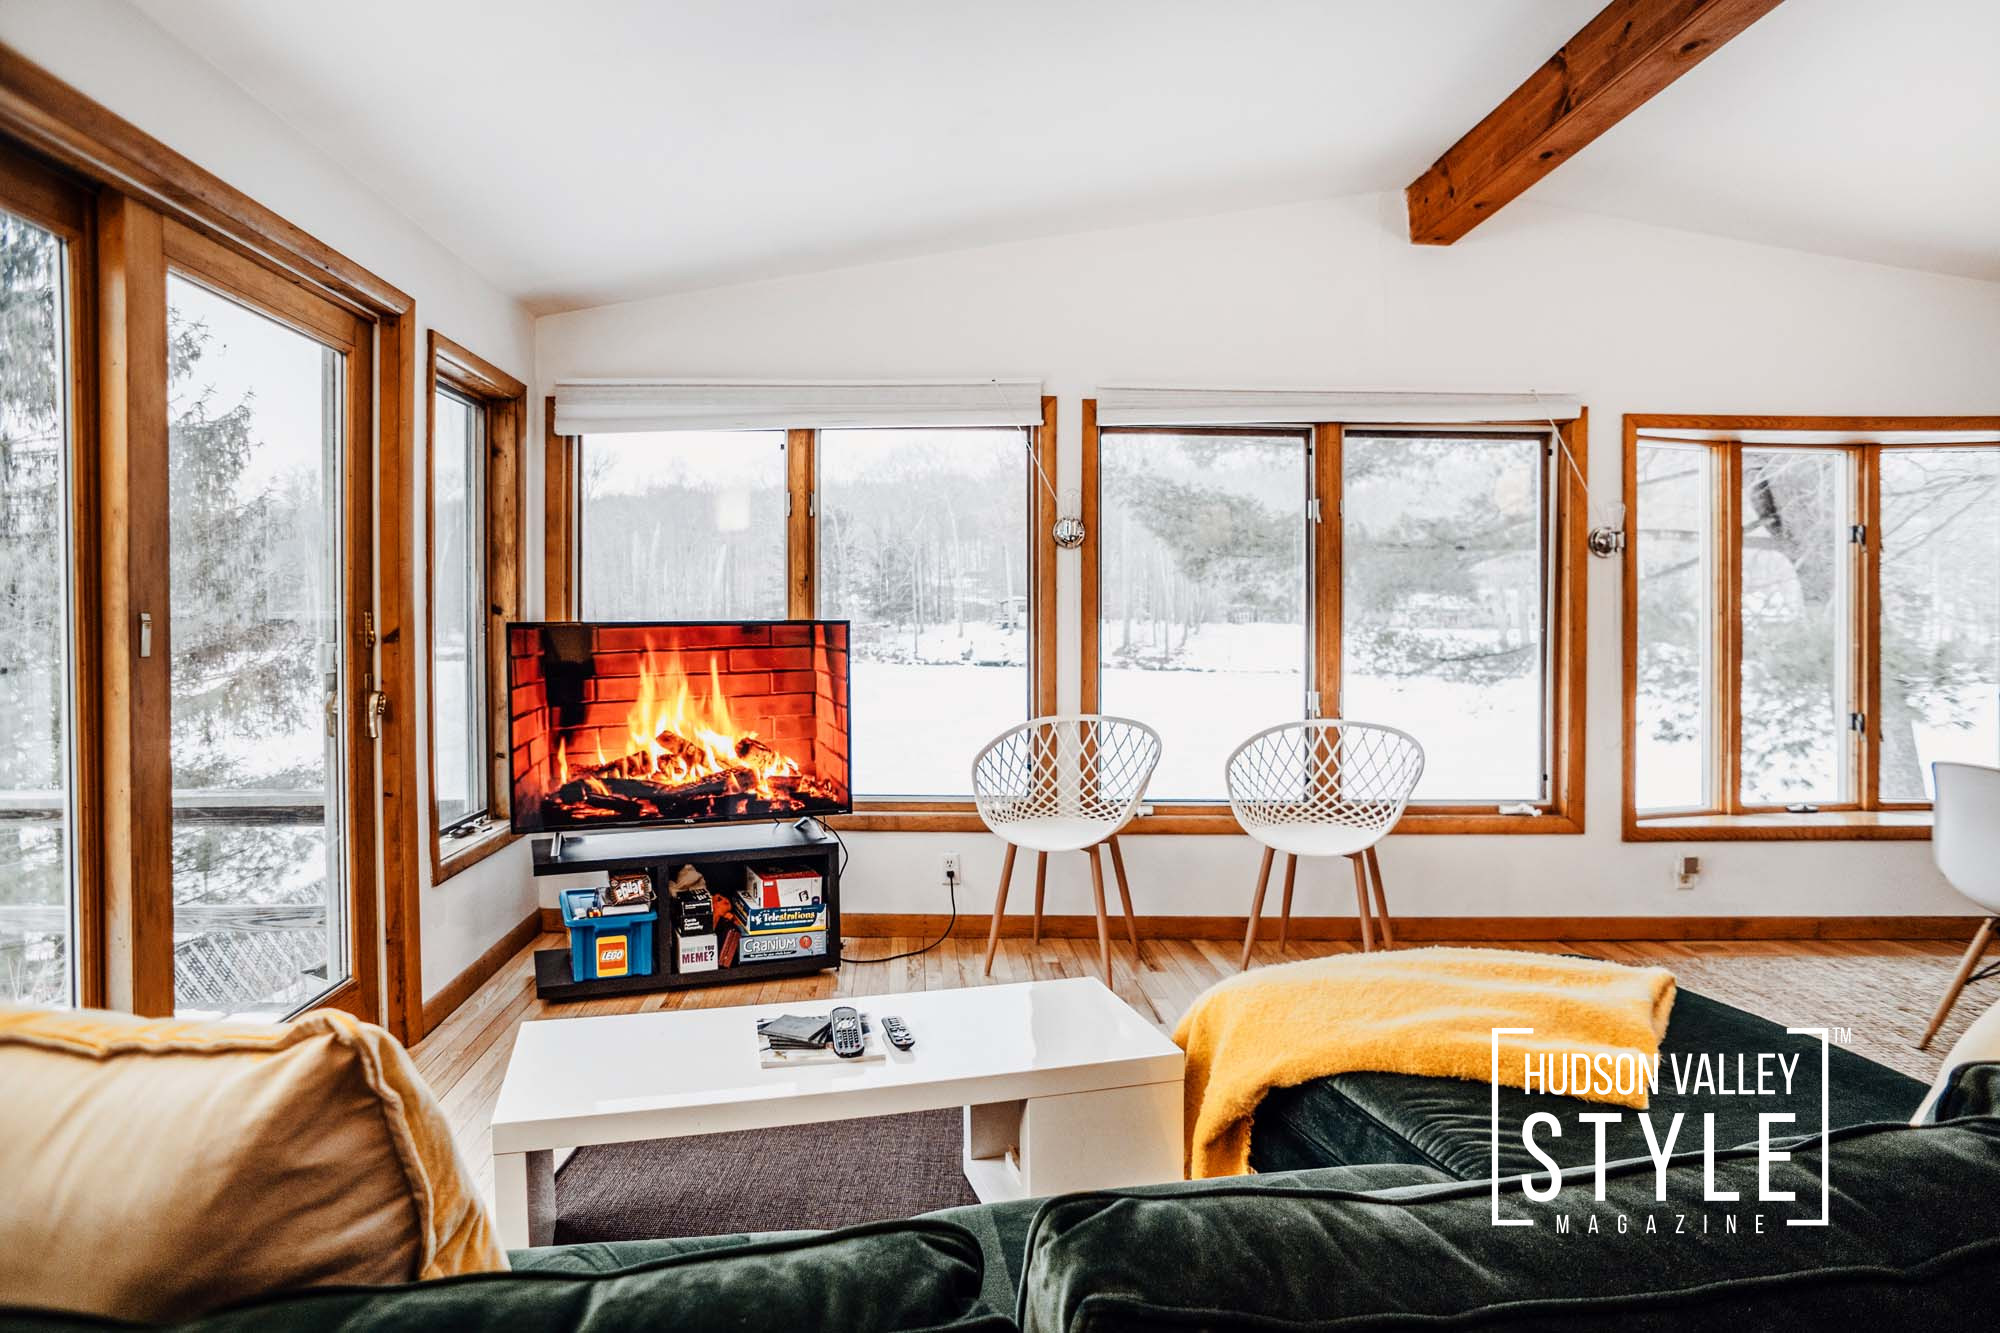 Spend a Weekend away from the City in the Beautiful Pinebush Lake House Spend a Weekend away from the City in the Beautiful Pinebush Lake House – Airbnb / VRBO Photography by Alluvion Real Estate – Maxwell Alexander – Duncan Avenue Studios